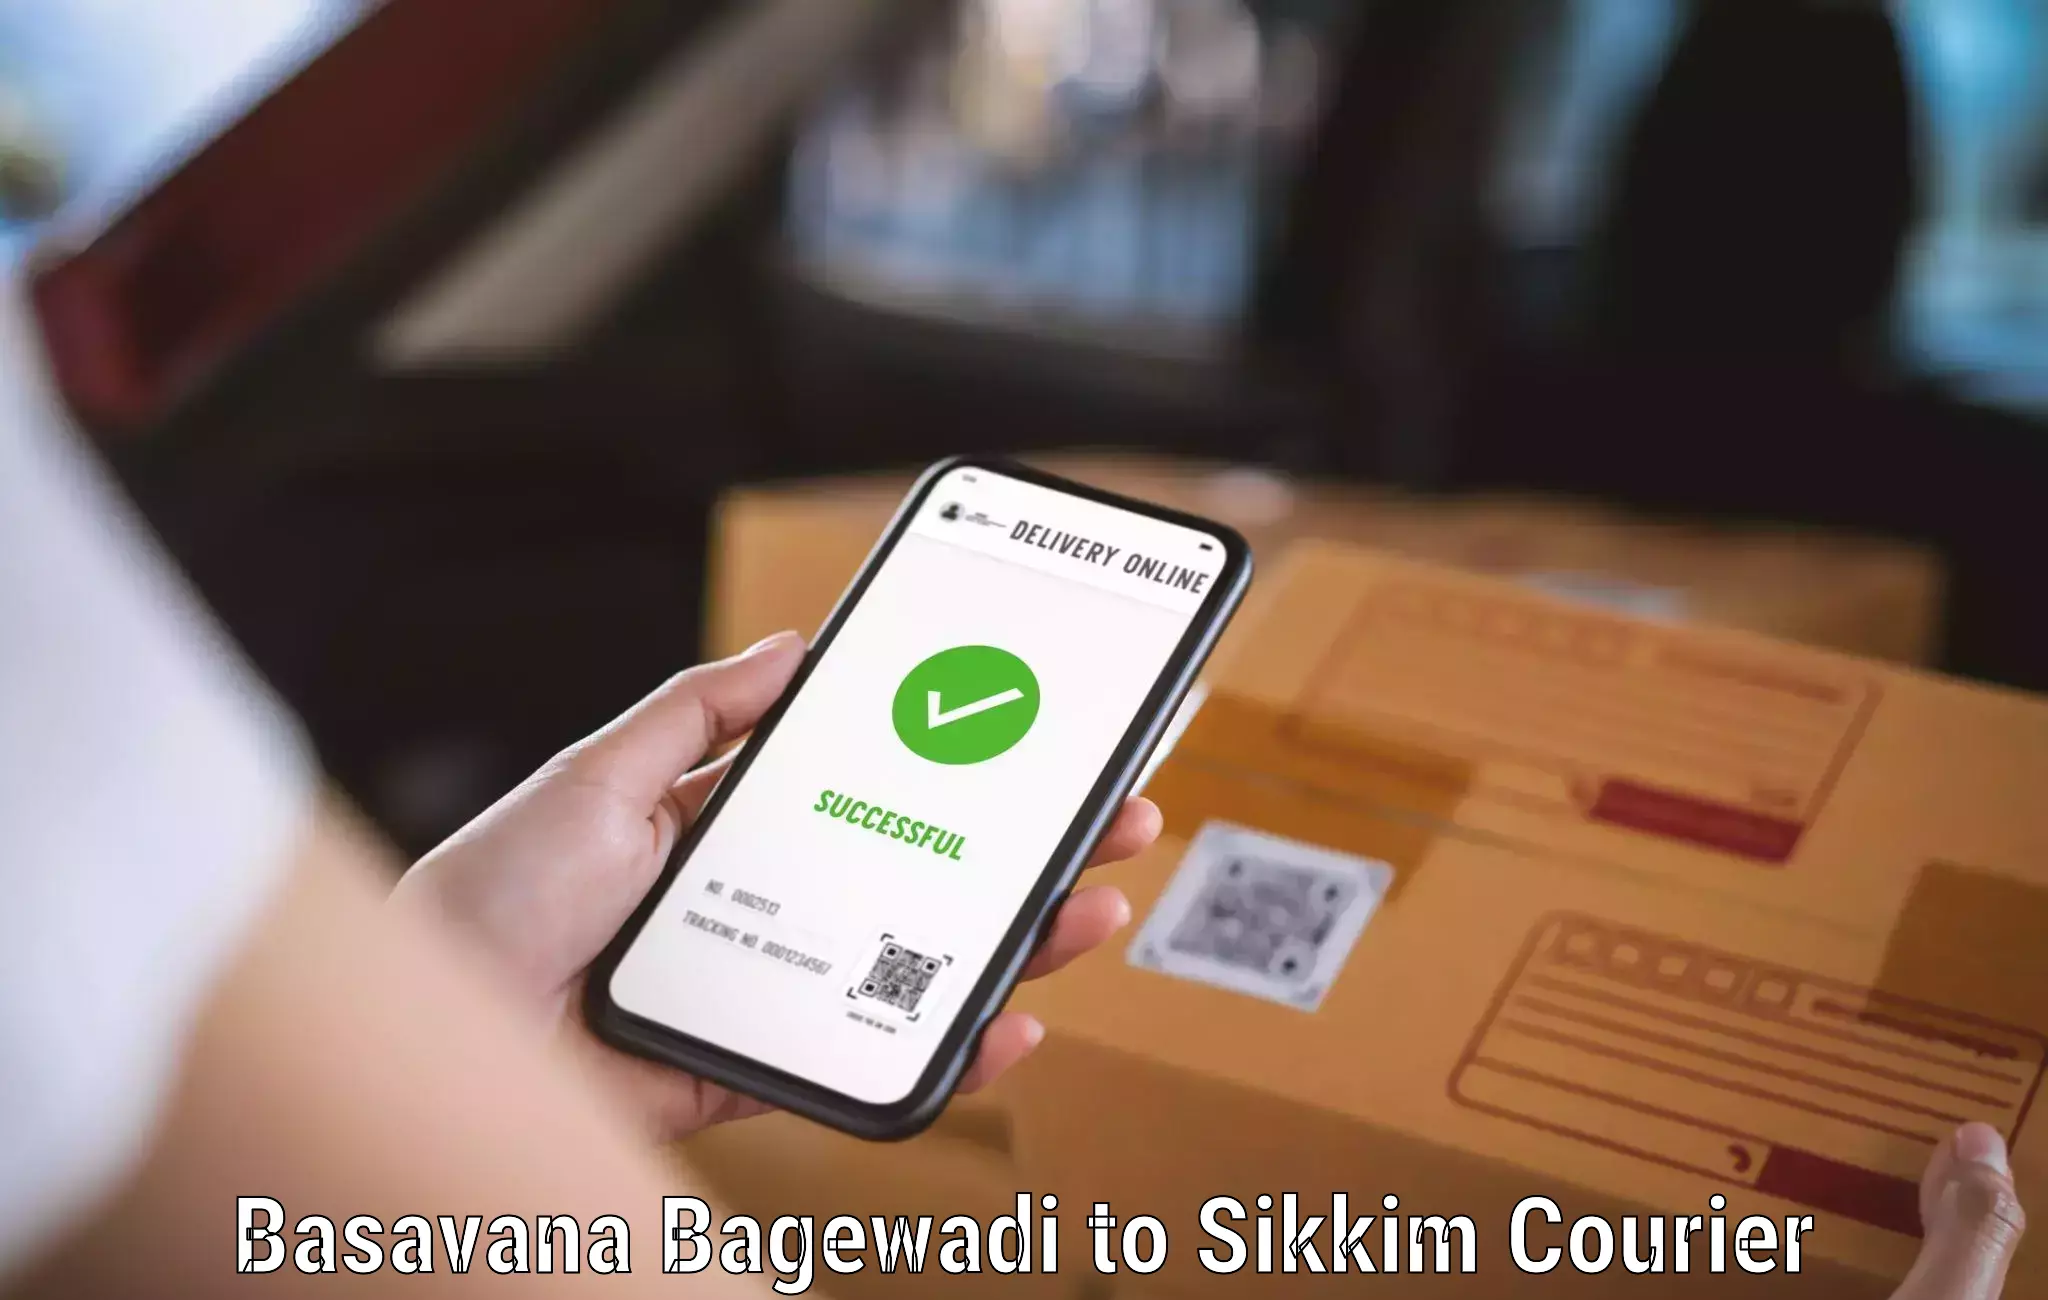 State-of-the-art courier technology Basavana Bagewadi to East Sikkim